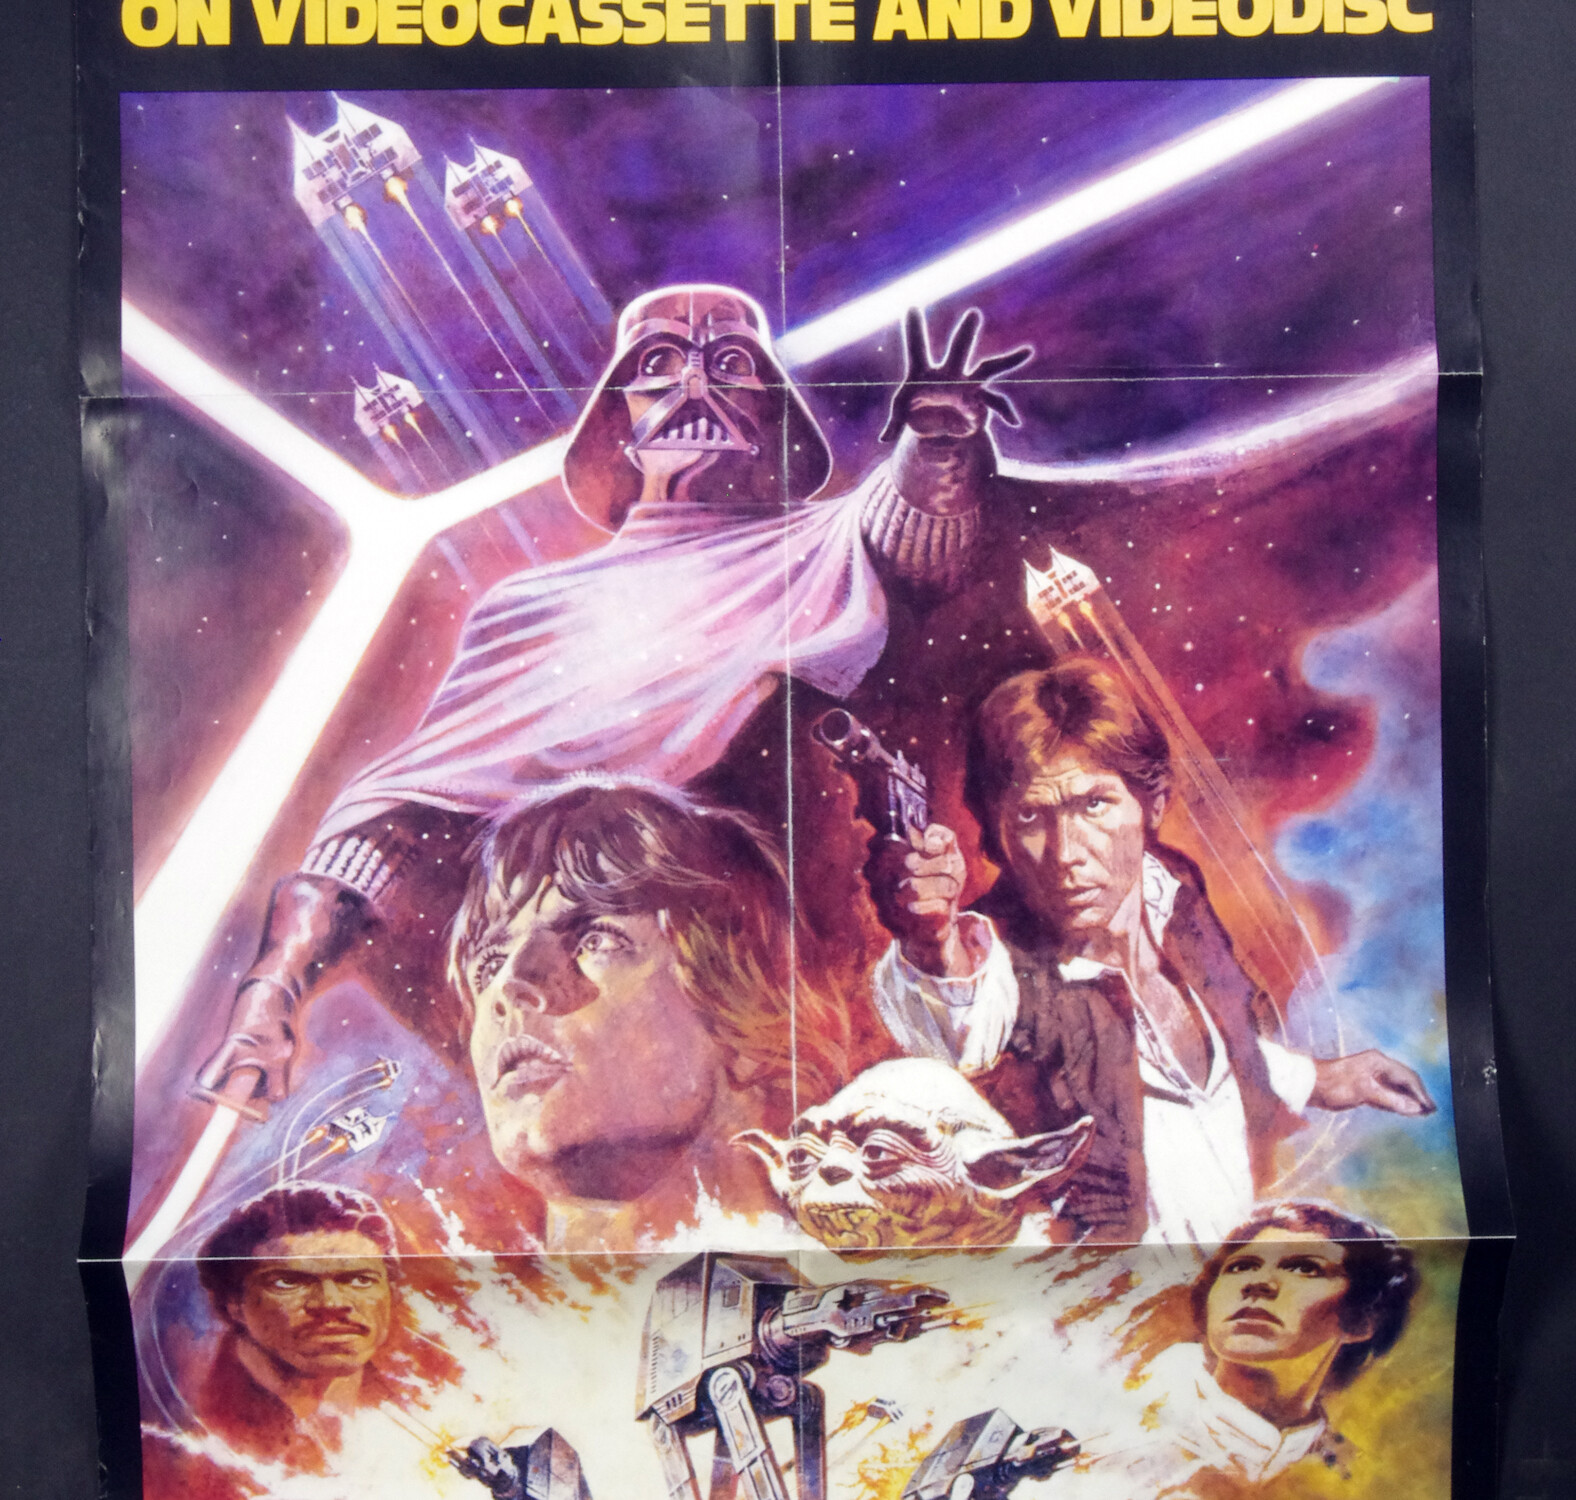 Star Wars Poster Empire Strikes Back Poster 1980 Home Video Promotion